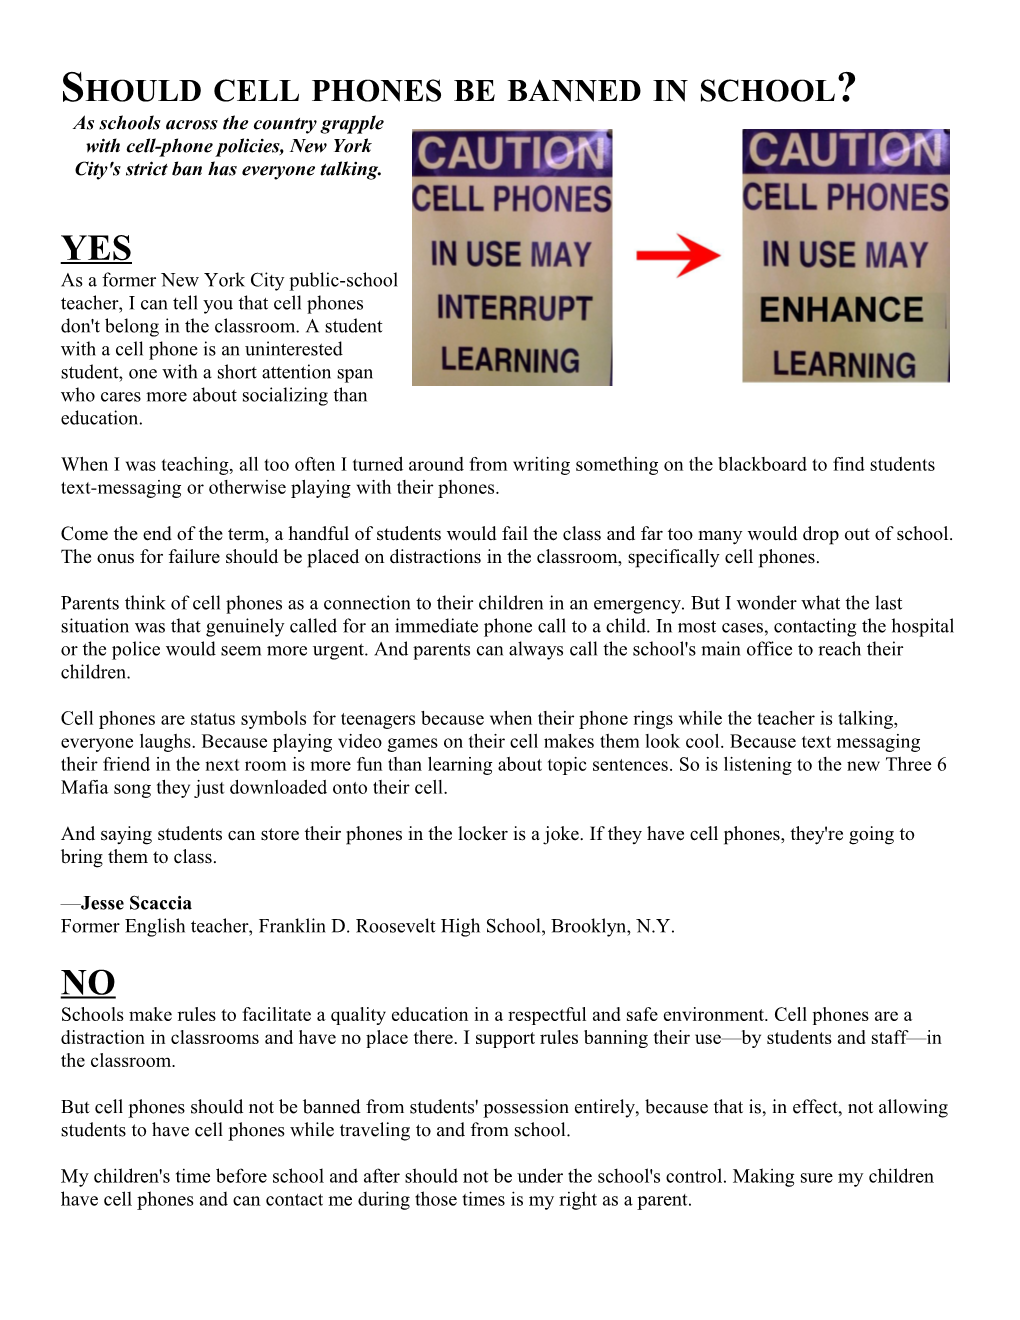 Should Cell Phones Be Banned in School?